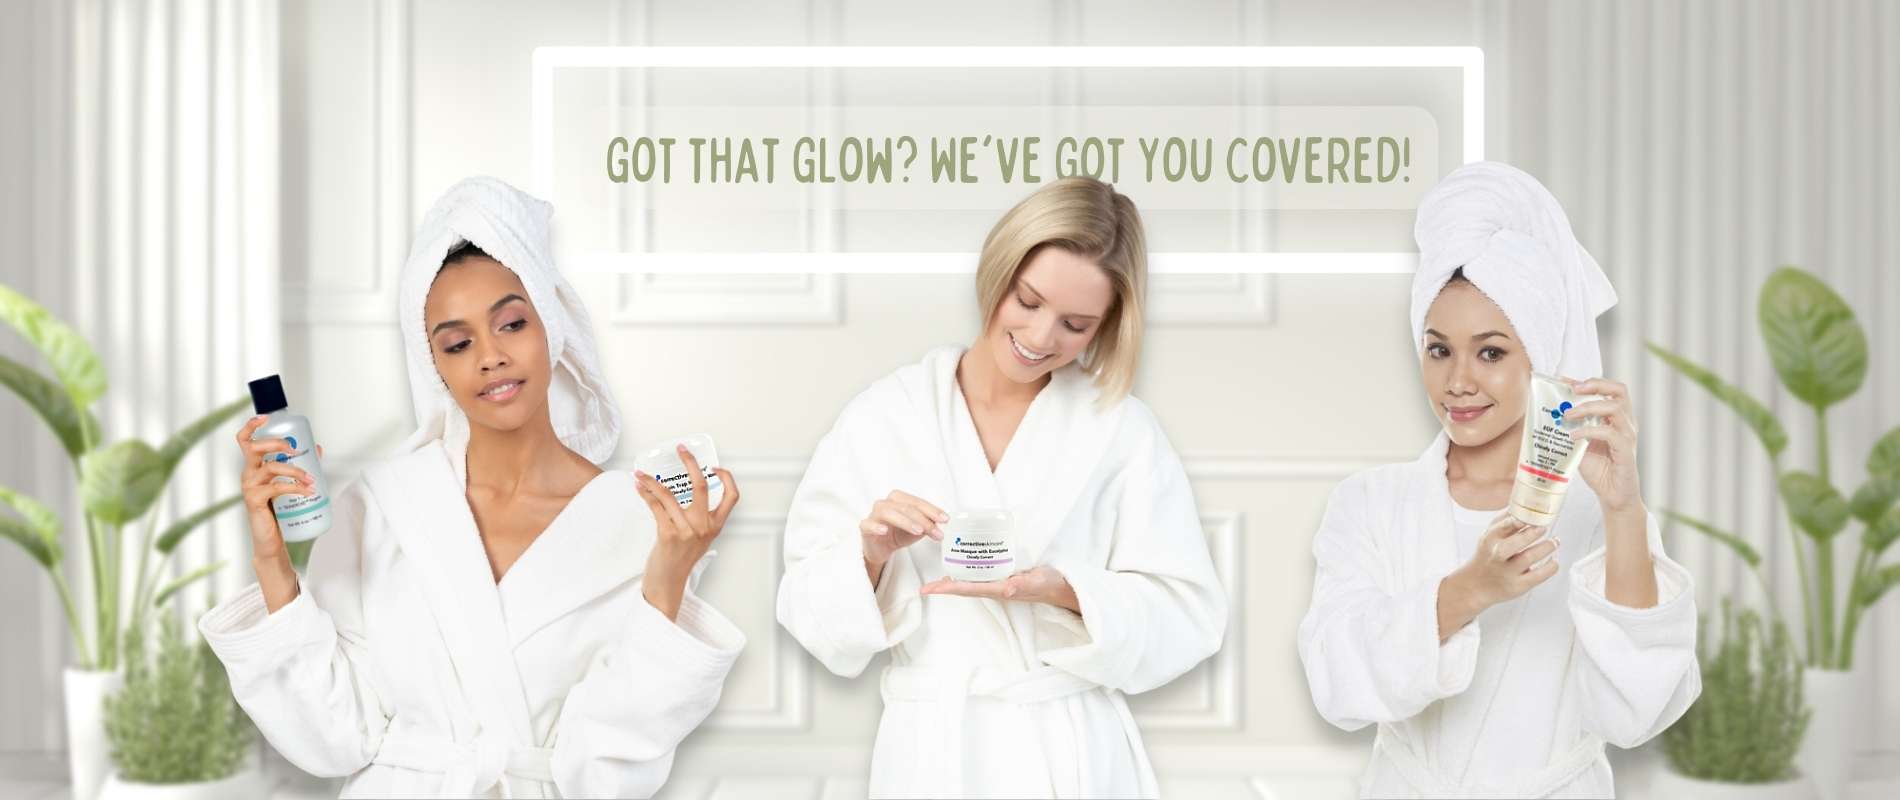 Got that Glow? We've Got You Covered!